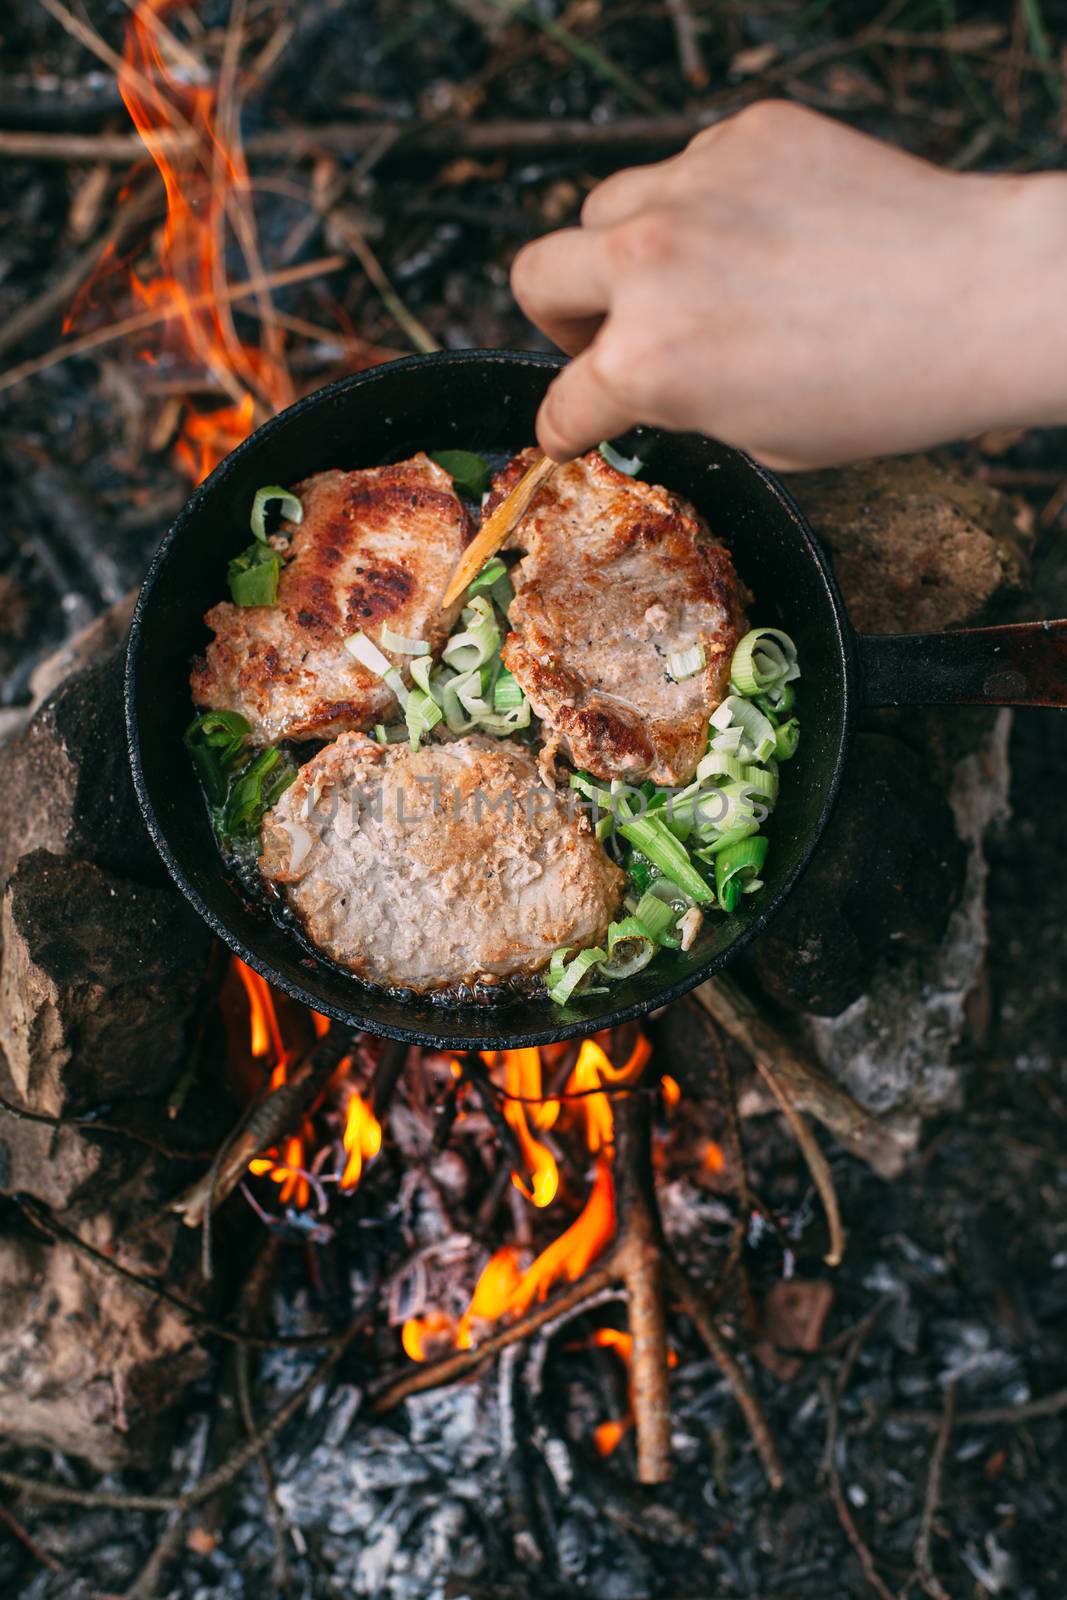 Frying meat in a pan over an open fire with leek. Steak in a pan on a fire. Cooking in nature. Picnic. Grill on fire. Hand with a wooden spatula.